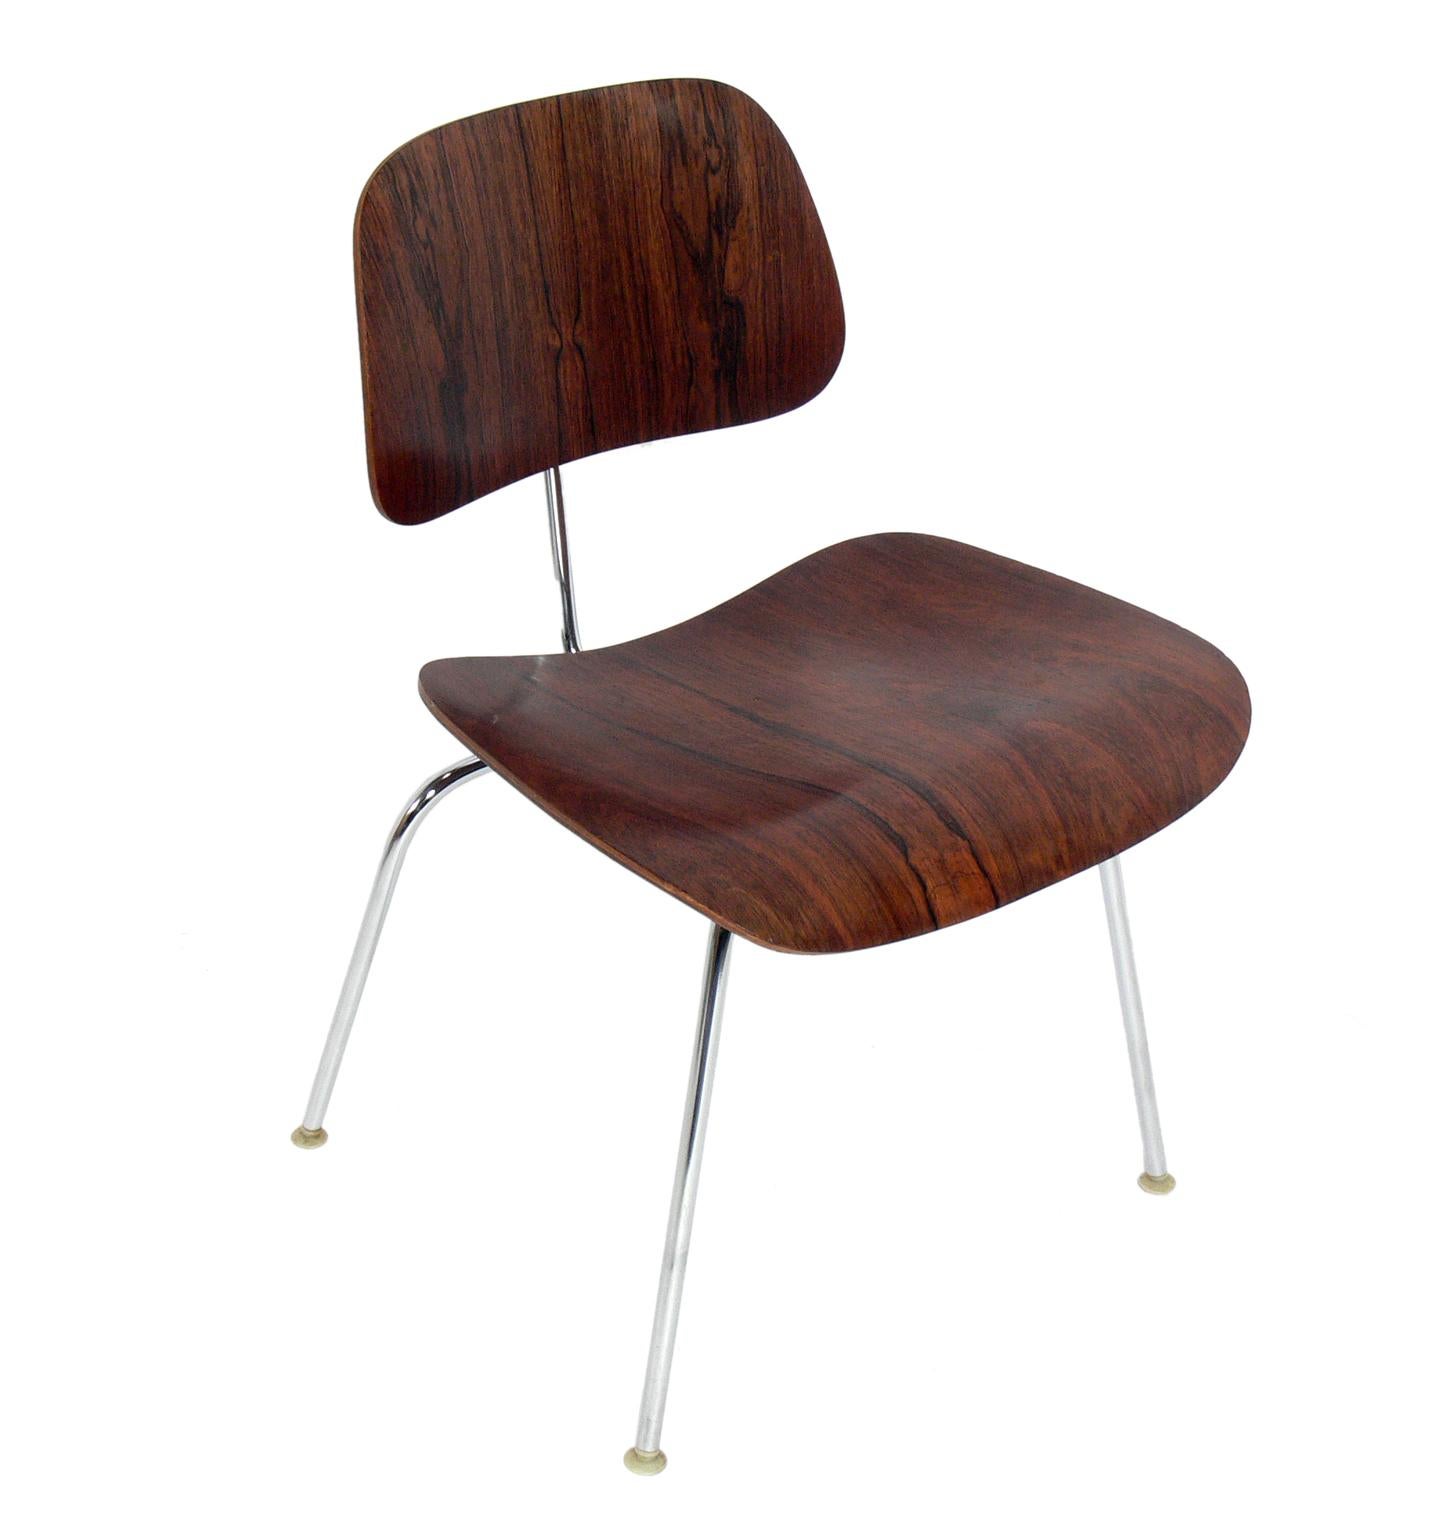 Hard To Find In Rosewood DCM (Dining Chair Metal) Chairs, designed by Charles and Ray Eames for Herman Miller, circa 1960s. Beautiful graining to the rosewood. They are priced at $1200 each or $2200 for the pair. They are a versatile size and can be